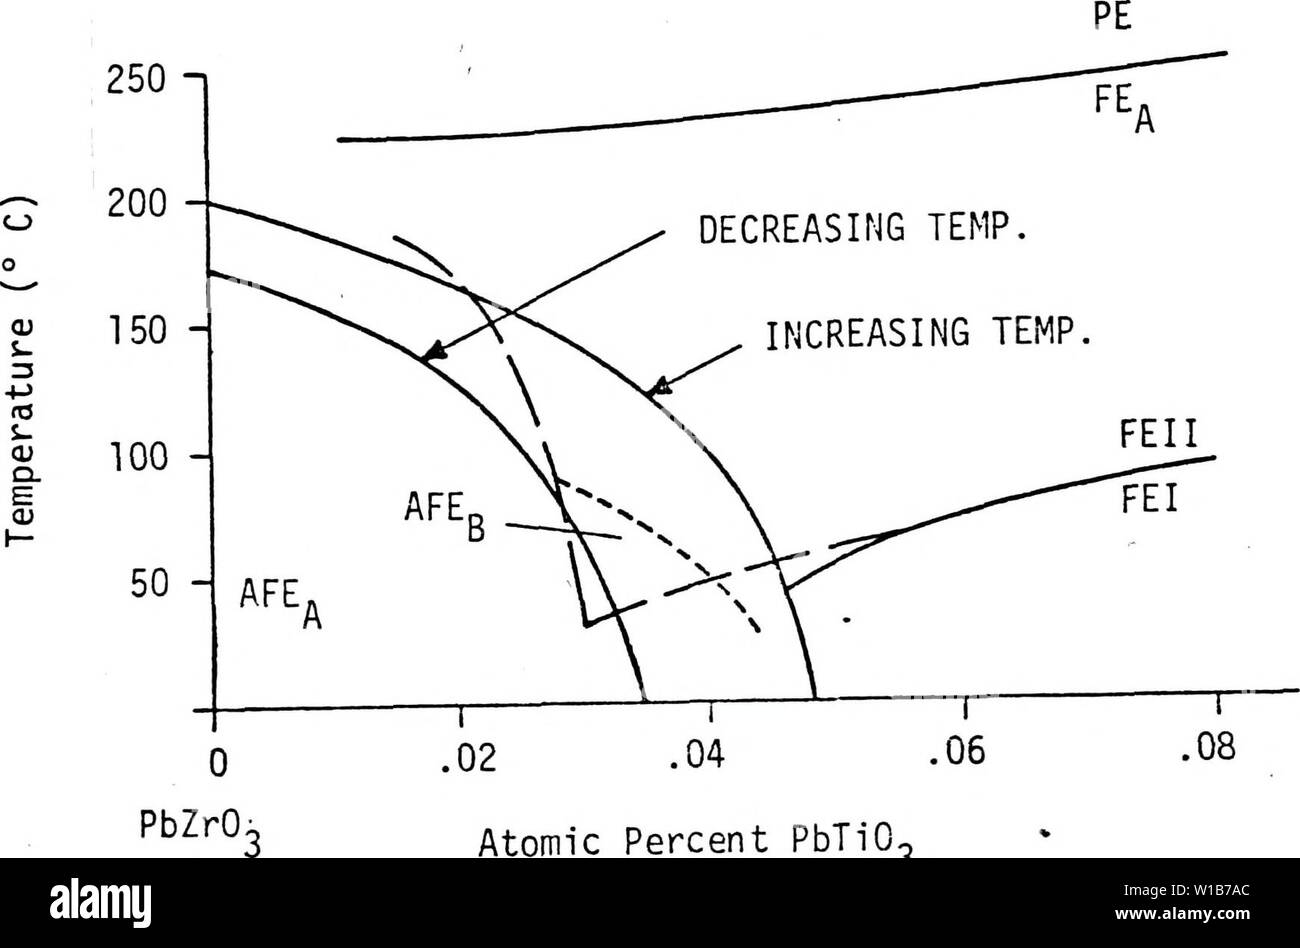 Archive image from page 33 of Dielectric characteristics of PZT 955. Dielectric characteristics of PZT 95/5 ferroelectric ceramics at high pressures . dielectriccharac00spea Year: 1977   PbTiO,  PbNb206 «- 100 PbZrO. Fiaure 5. Ternary compositional phase diagram at room temperature for PbZr03, PbTi02, and PbNb206 near the 100 PbZr03 composition (19, p. 384). 250 -i    Figure 6. ,02 .04 Atomic Percent PbTiO Temperature compositional phase diagram for lead zirconate- lead titanate with 1 Nb20s as developed by Berlincourt and Krueger (18, p. 18) as shown as solid lines, and by Torccaz et al. (20, Stock Photo